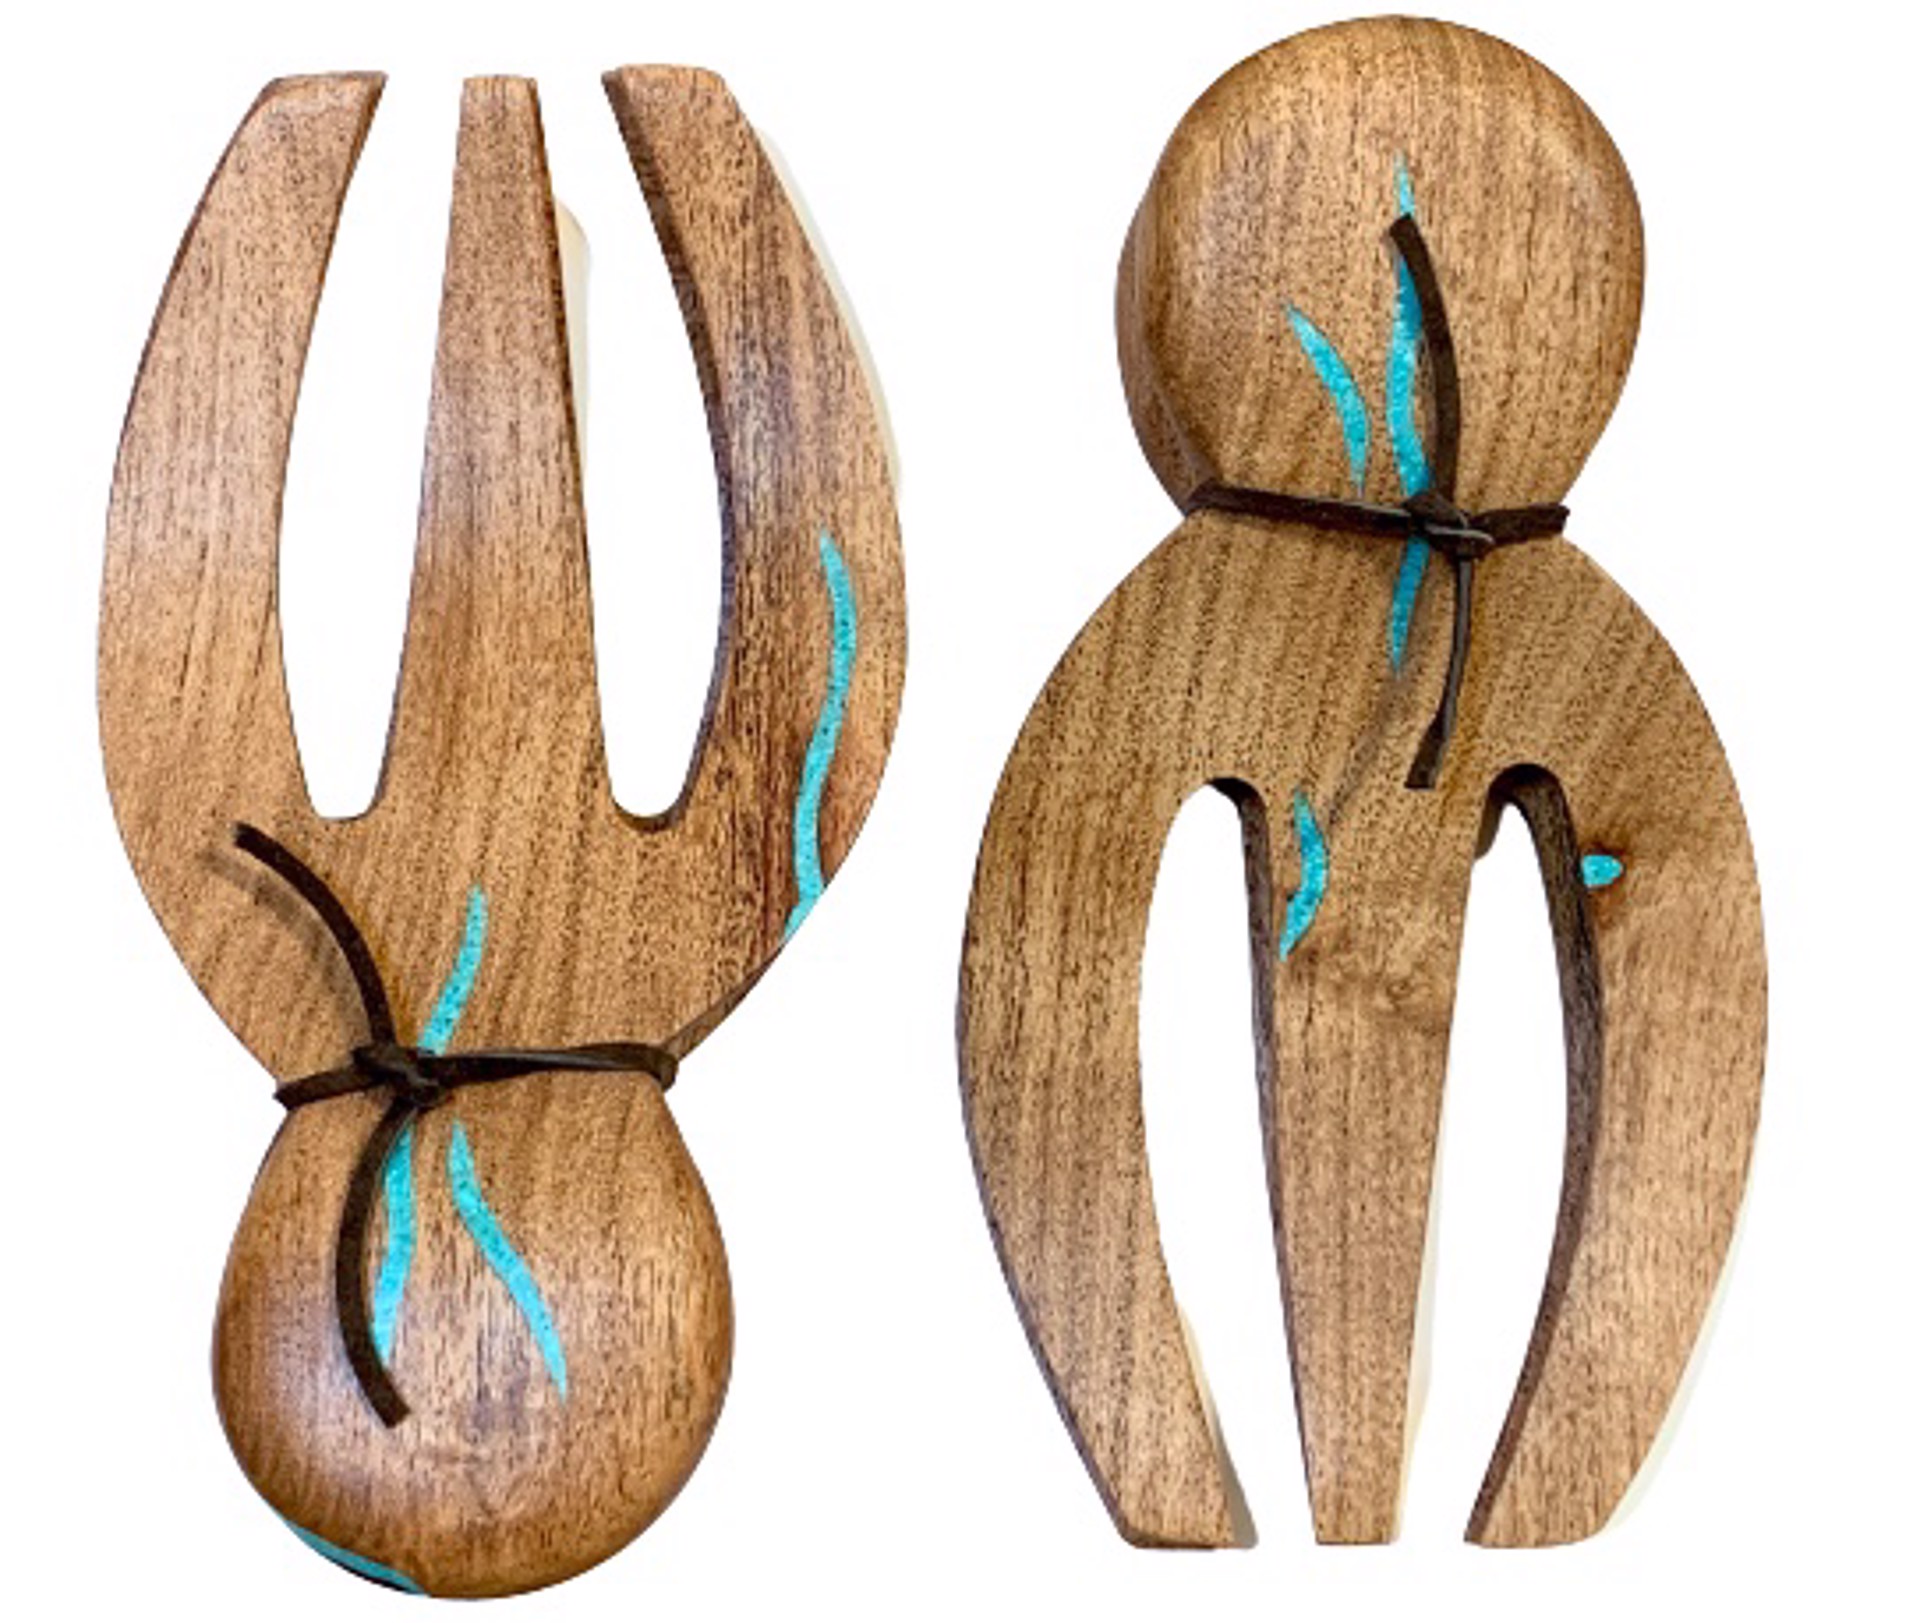 Utensils - Best Hands with Turquoise Inlay by TreeStump Woodcraft